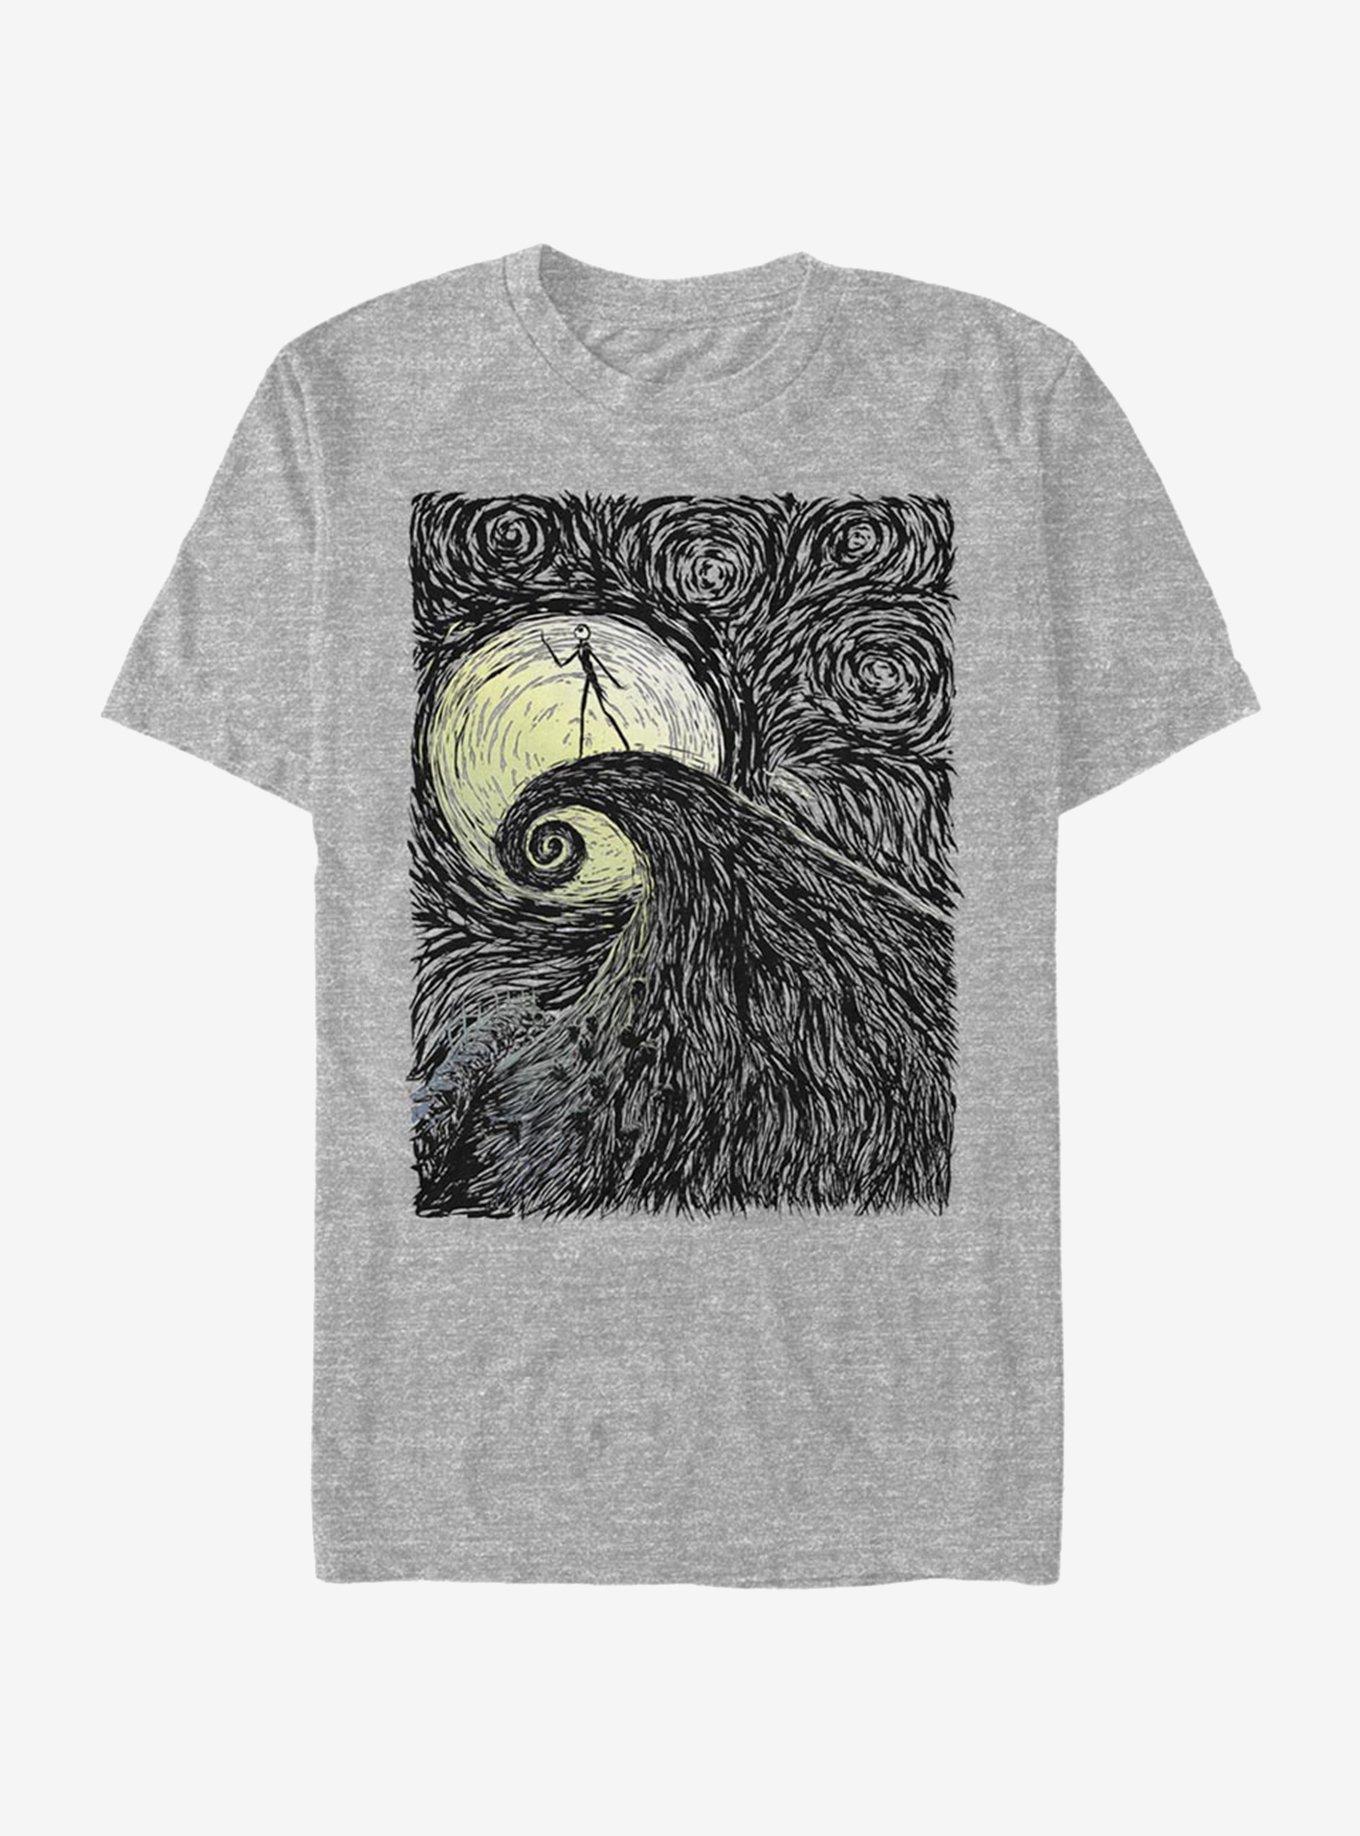 The Nightmare Before Christmas Spiral Hill T-Shirt